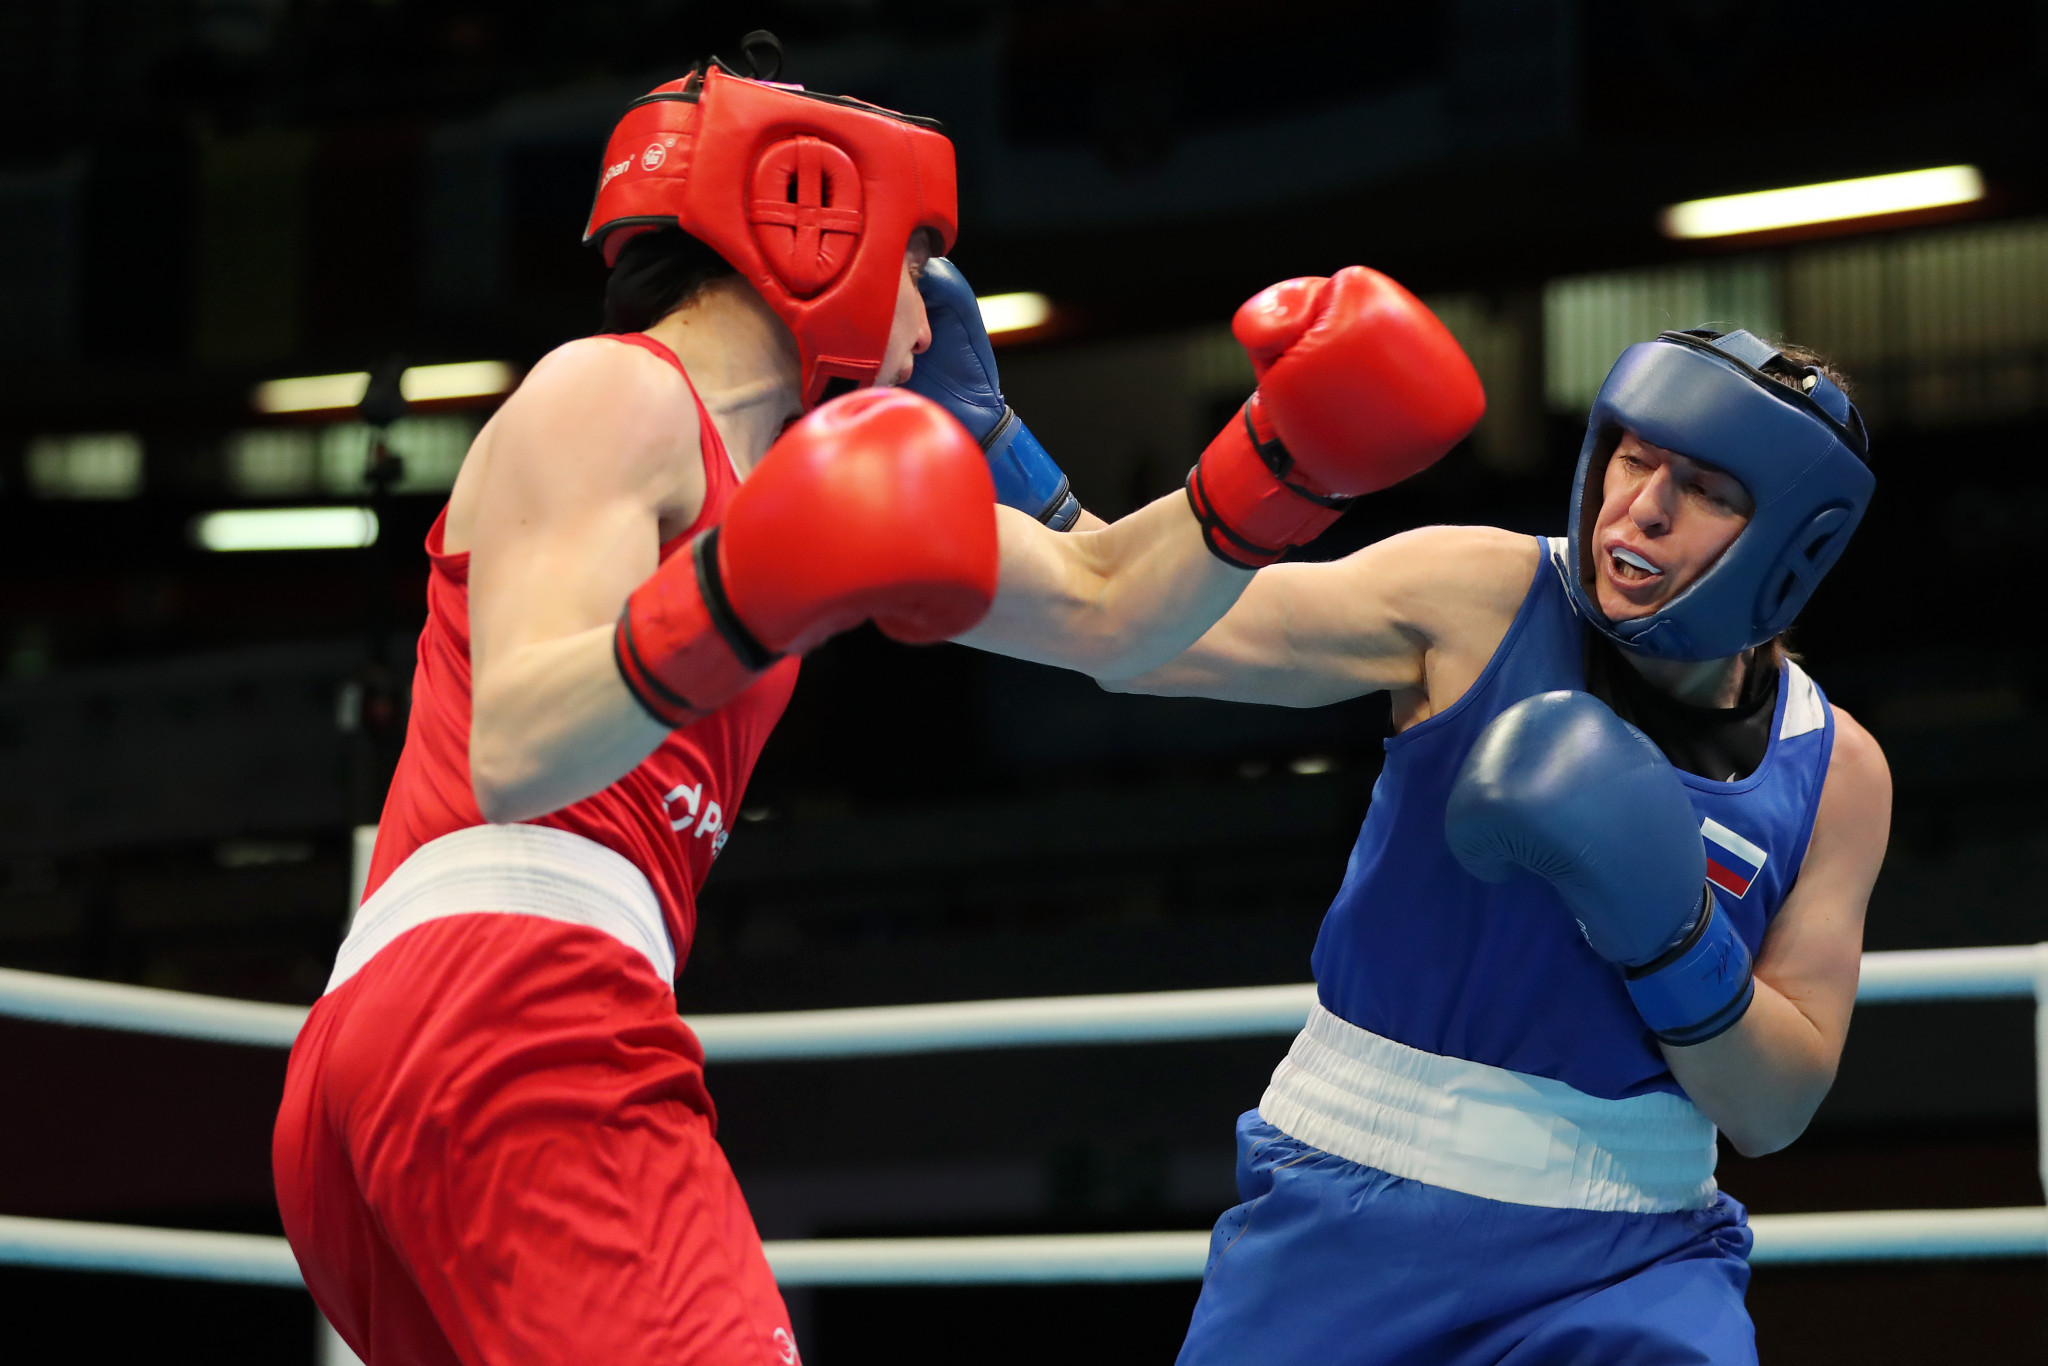 EUBC will allow Russian and Belarusian boxers to compete but not at Women's European Championships